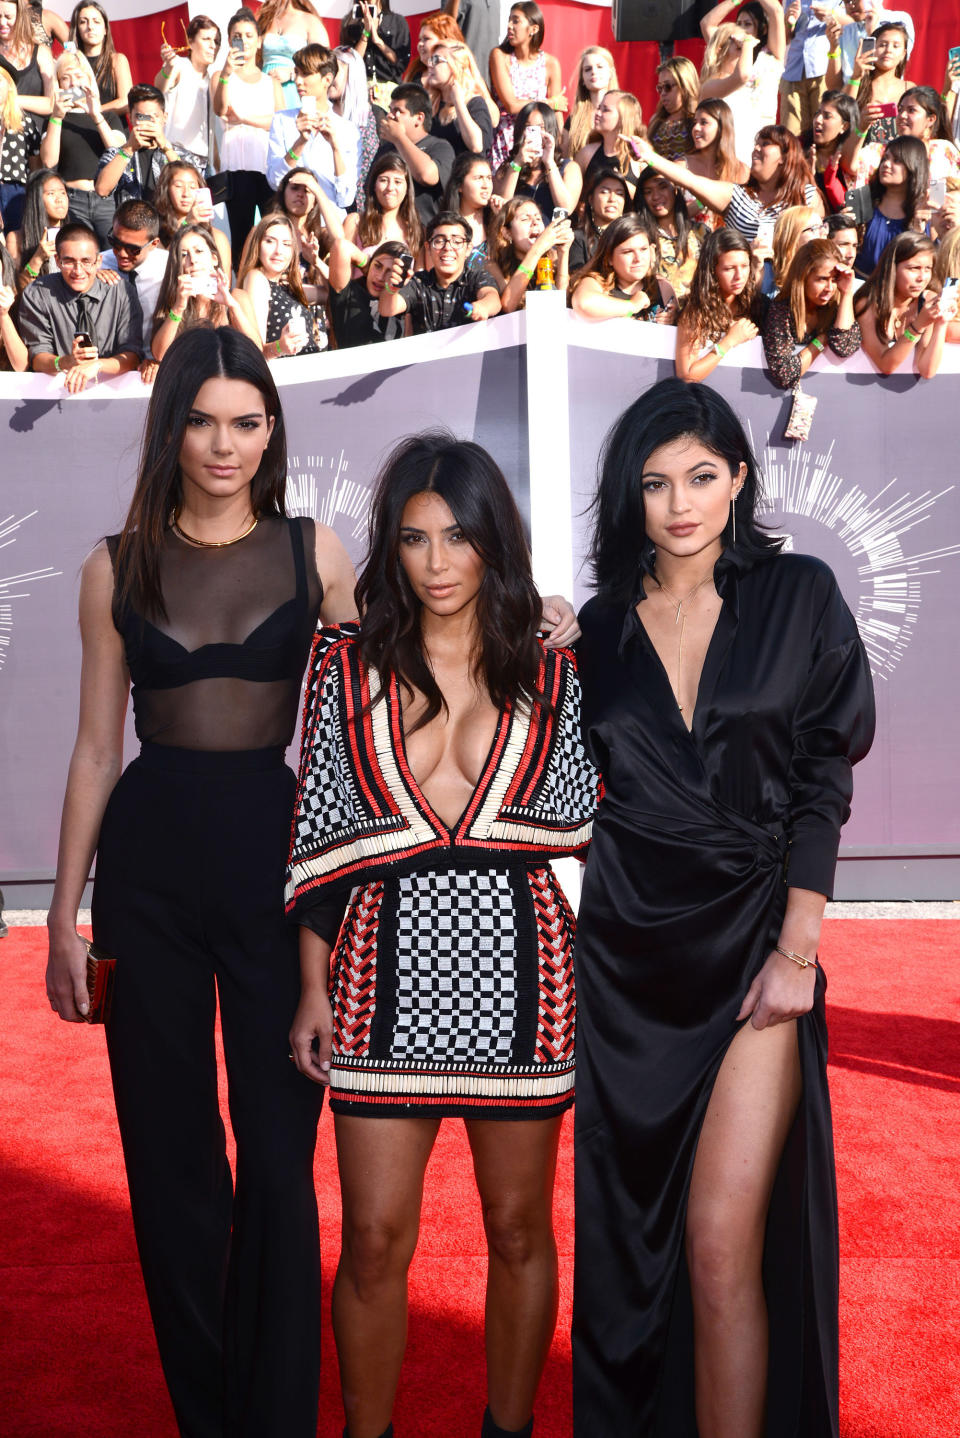 INGLEWOOD, CA - AUGUST 24:  Kendall Jenner, Kim Kardashian and Kylie Jenner arrive to the 2014 MTV Video Music Awards at The Forum on August 24, 2014 in Inglewood, California.  (Photo by C Flanigan/Getty Images)